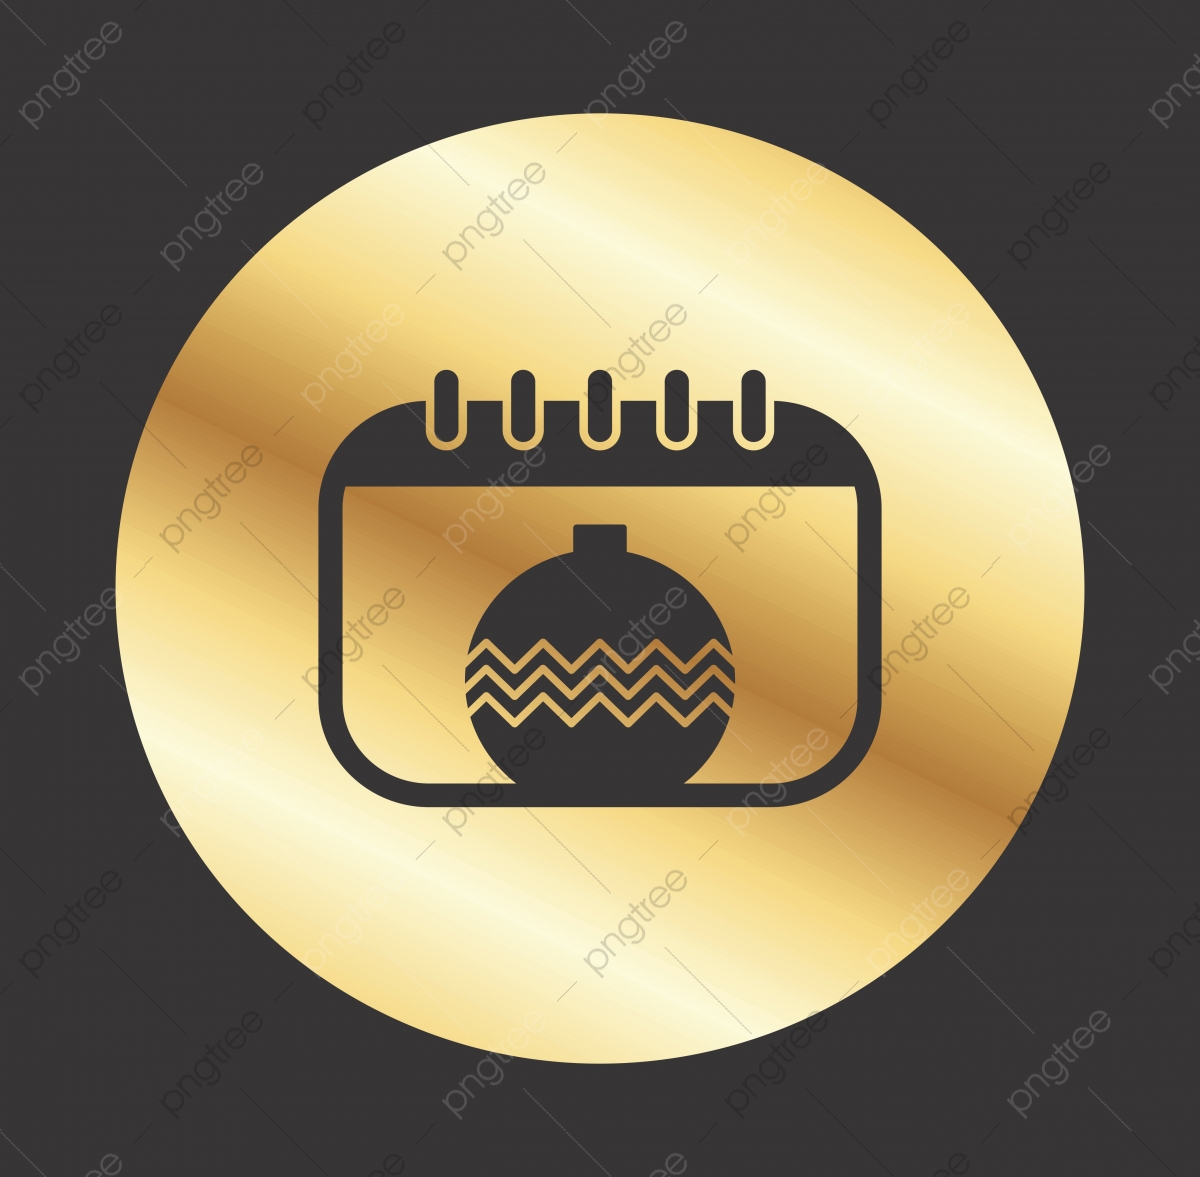 pngtree-calendar-icon-for-your-project-png-image_5233464